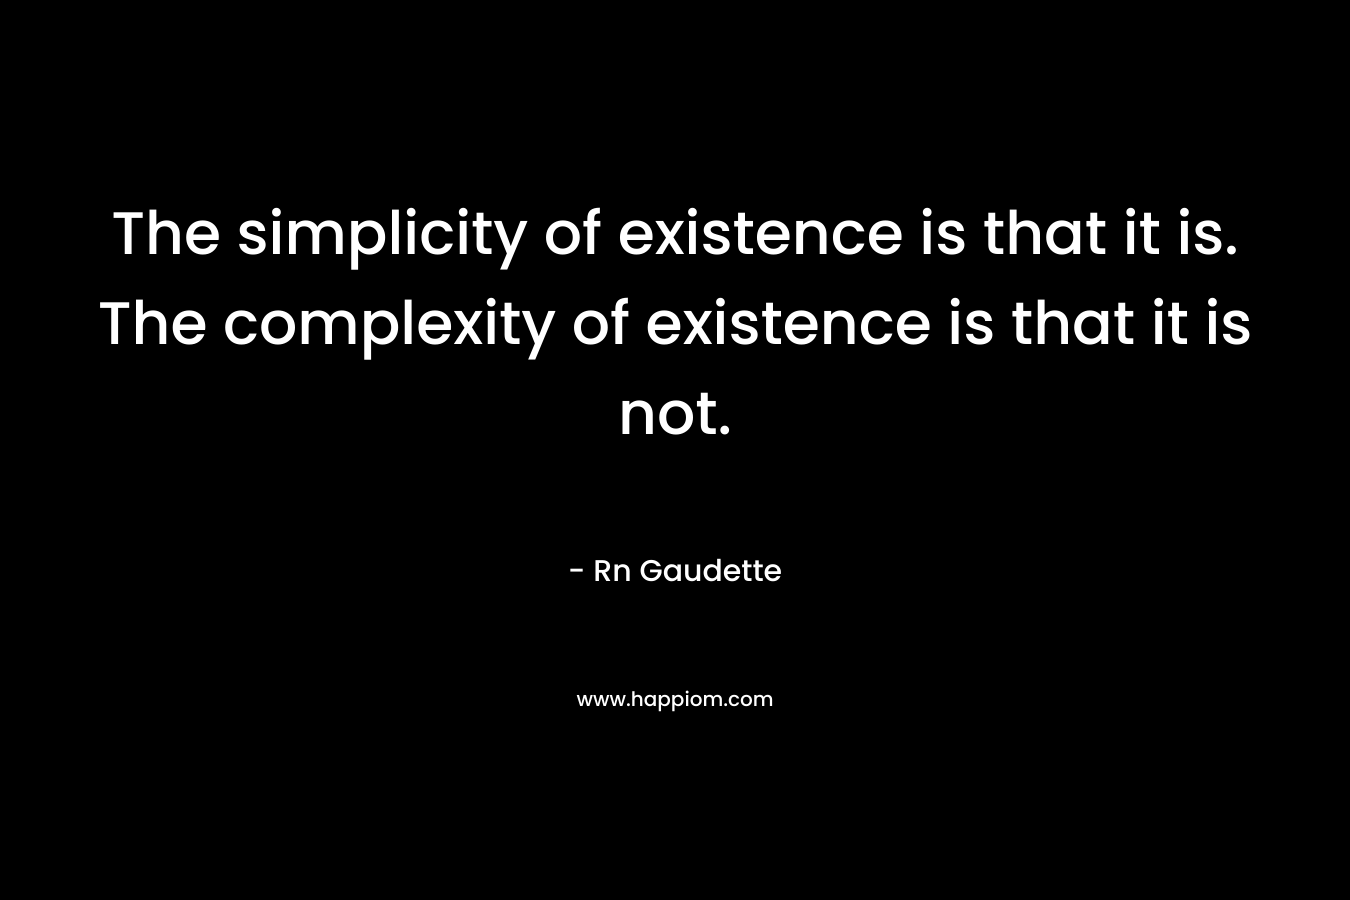 The simplicity of existence is that it is. The complexity of existence is that it is not. – Rn Gaudette